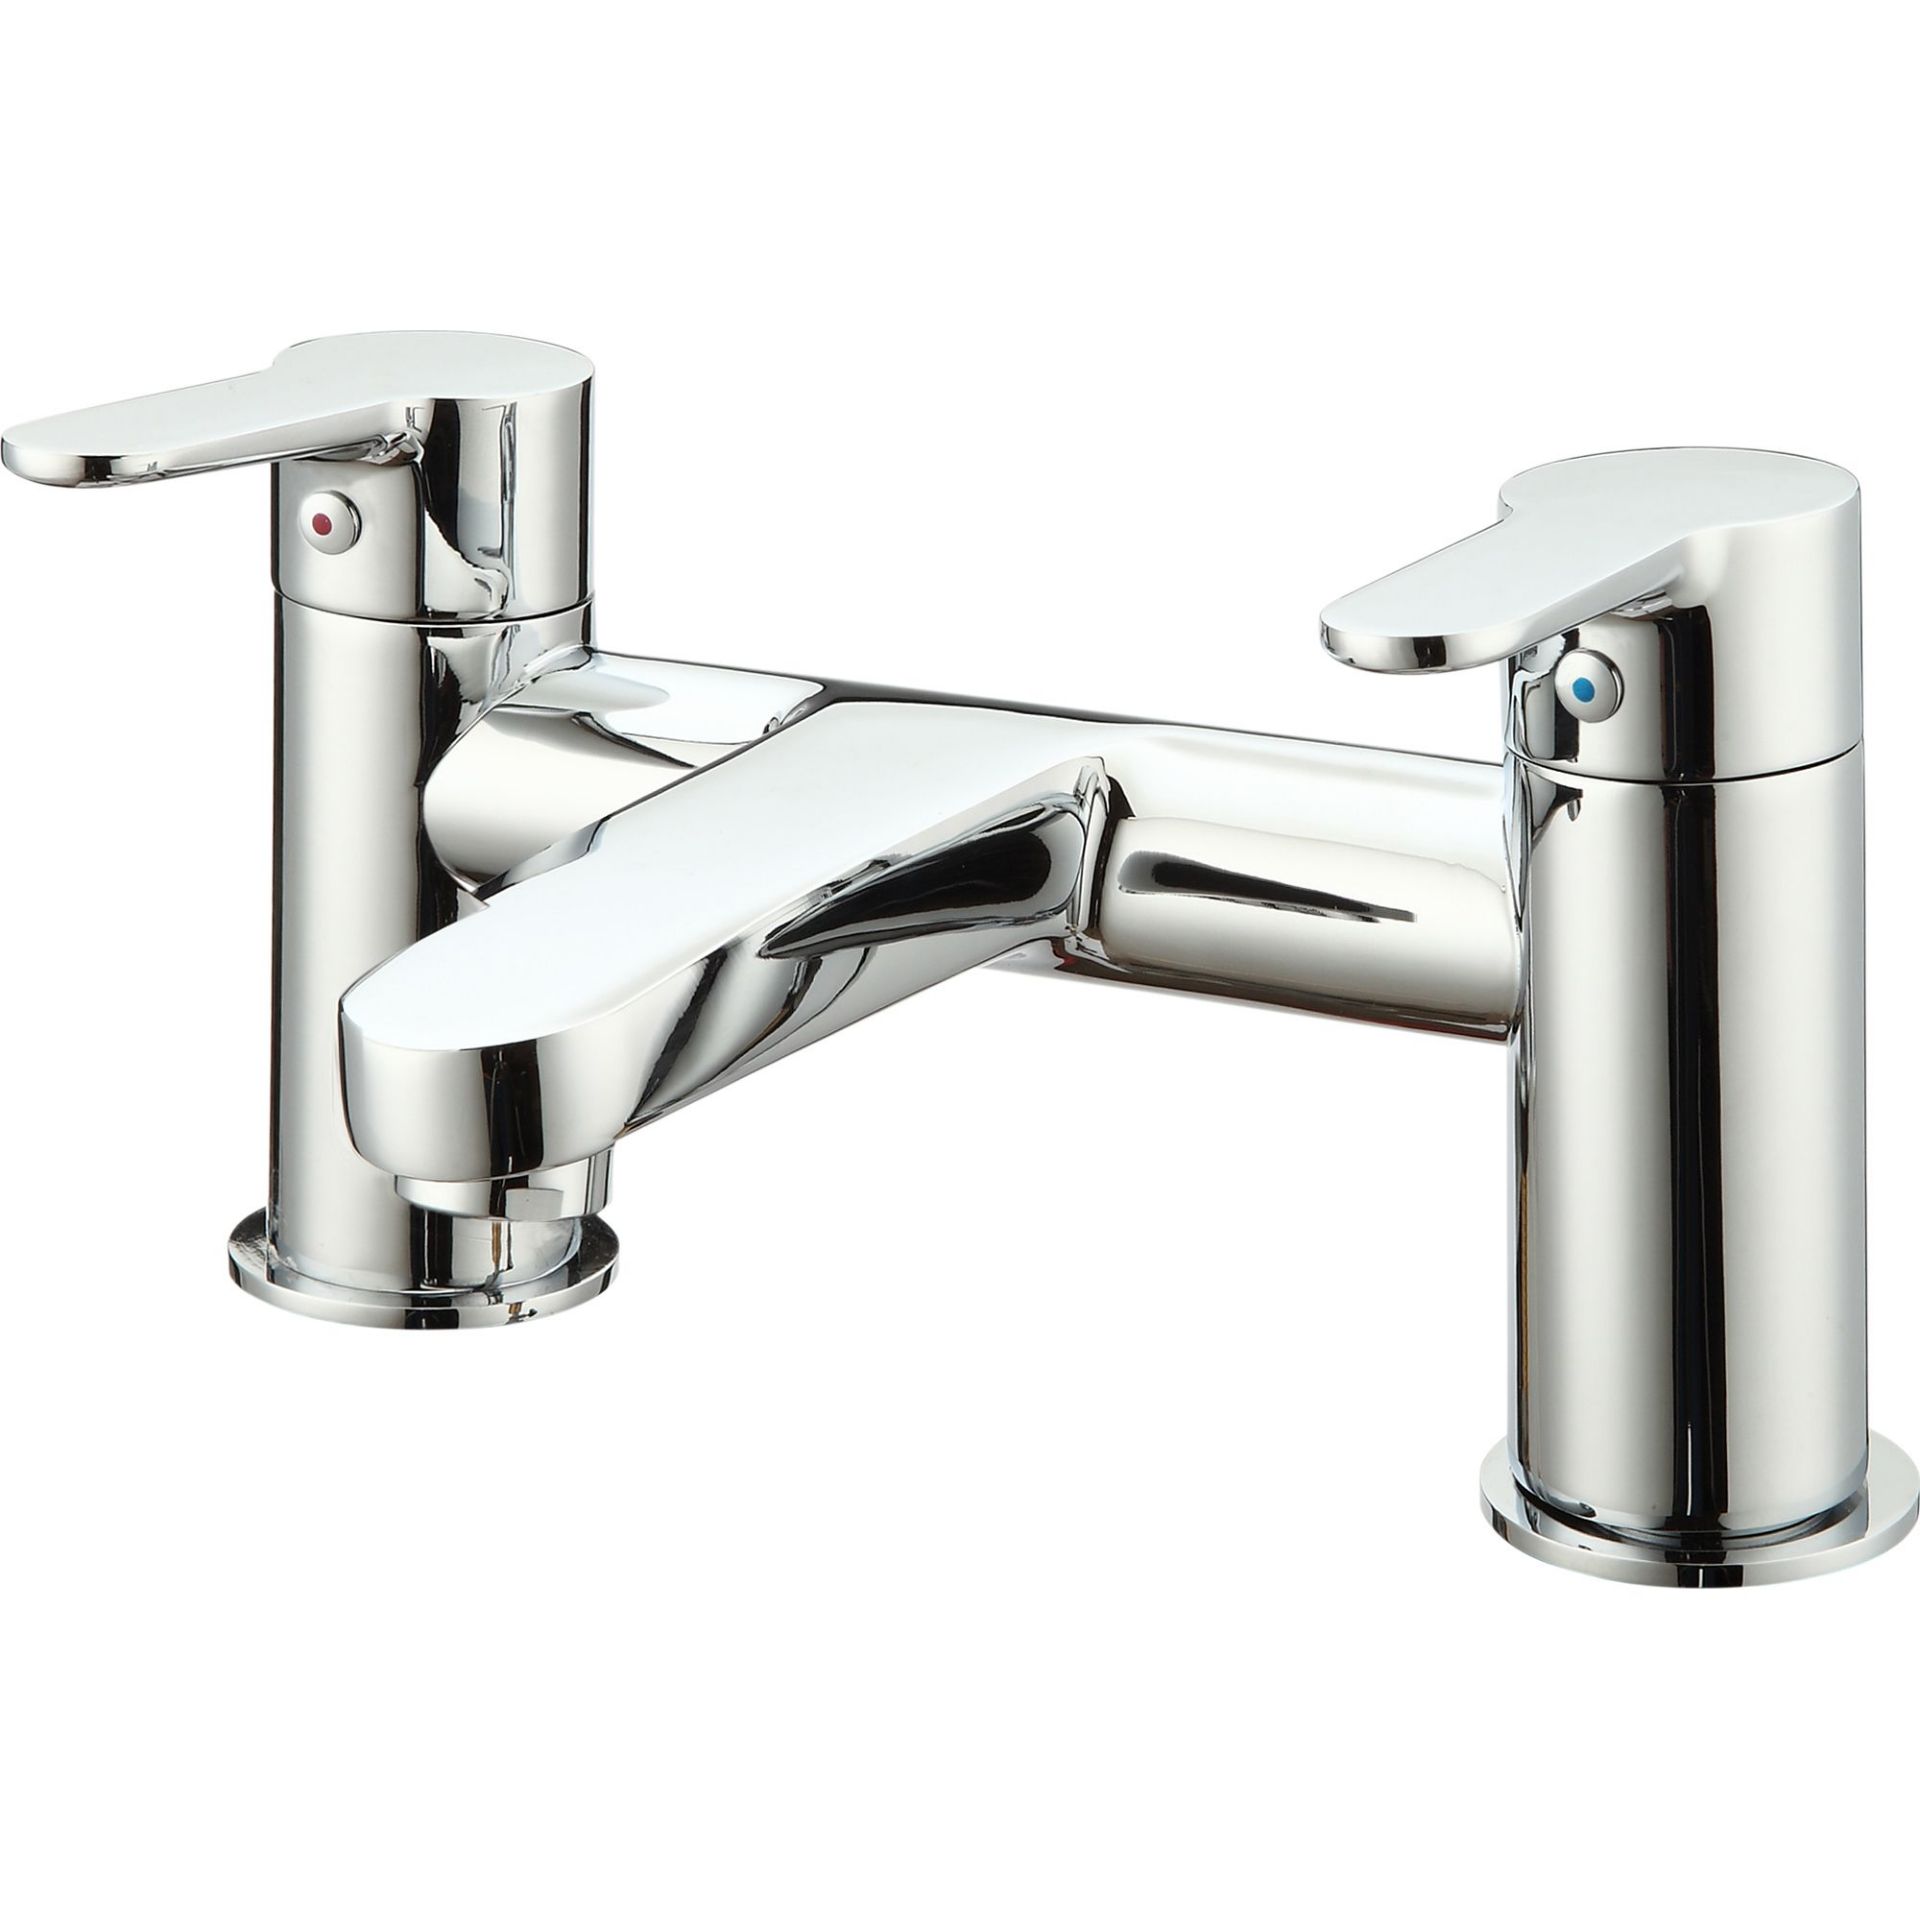 (REF1) Lecci Chrome-plated Bath Mono mixer Tap. This contemporary style chrome bath mixer from ...